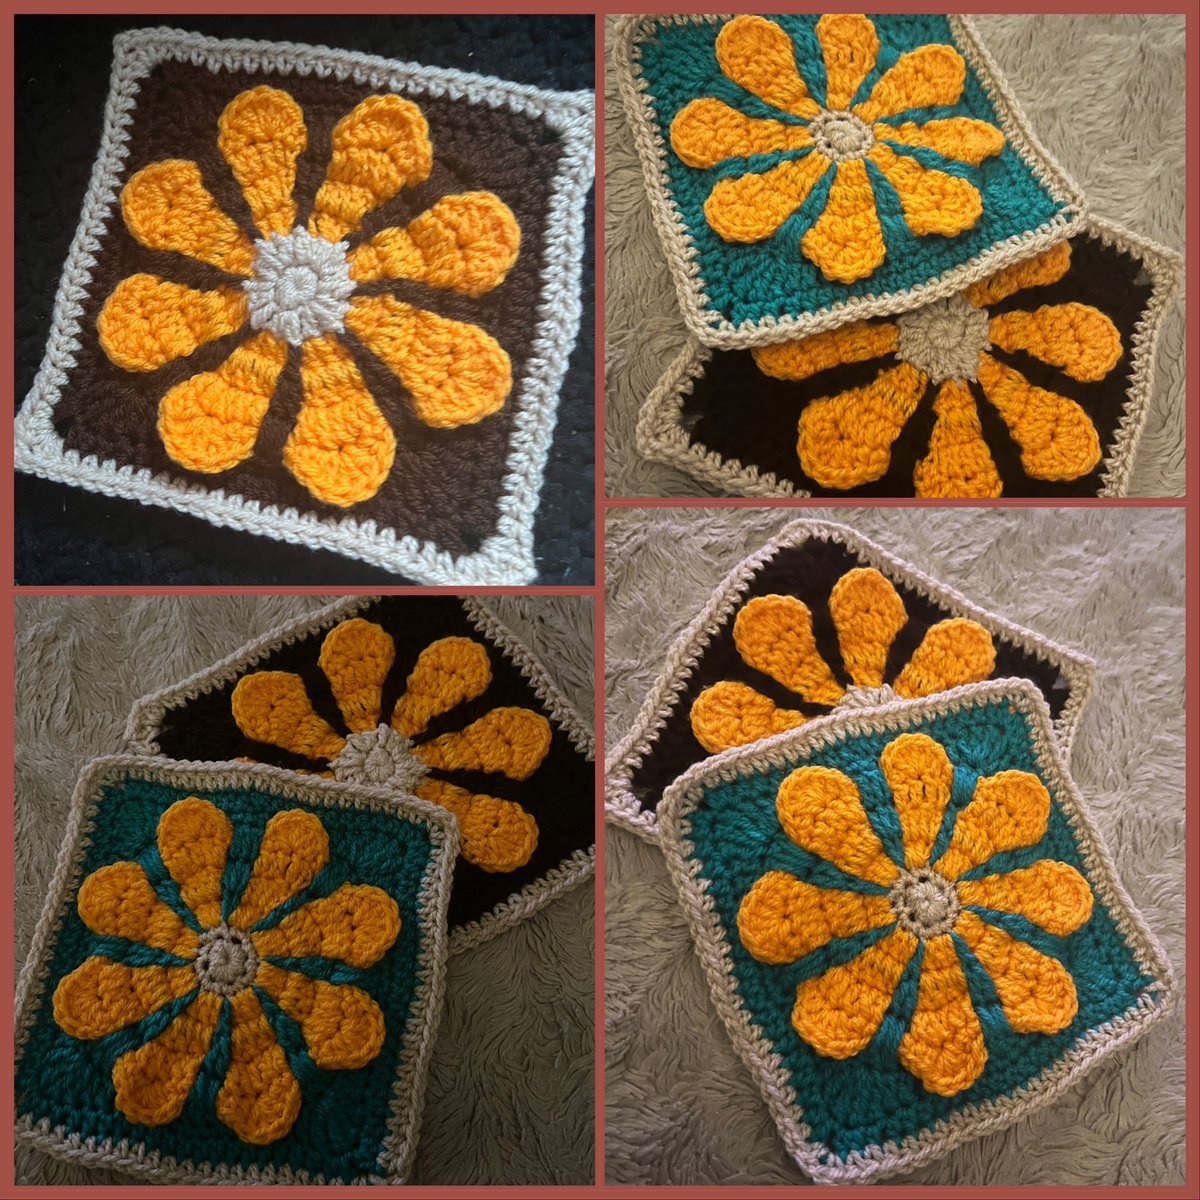 Messing about with a this wip flower square pattern, that’s two sizes made. 
One more to try later 🥰  
#crochet #wip #craftbizparty #UKMakers #inbiz #mybiz #crafts #yarn #crochetdesign #design #flowerpower #peace